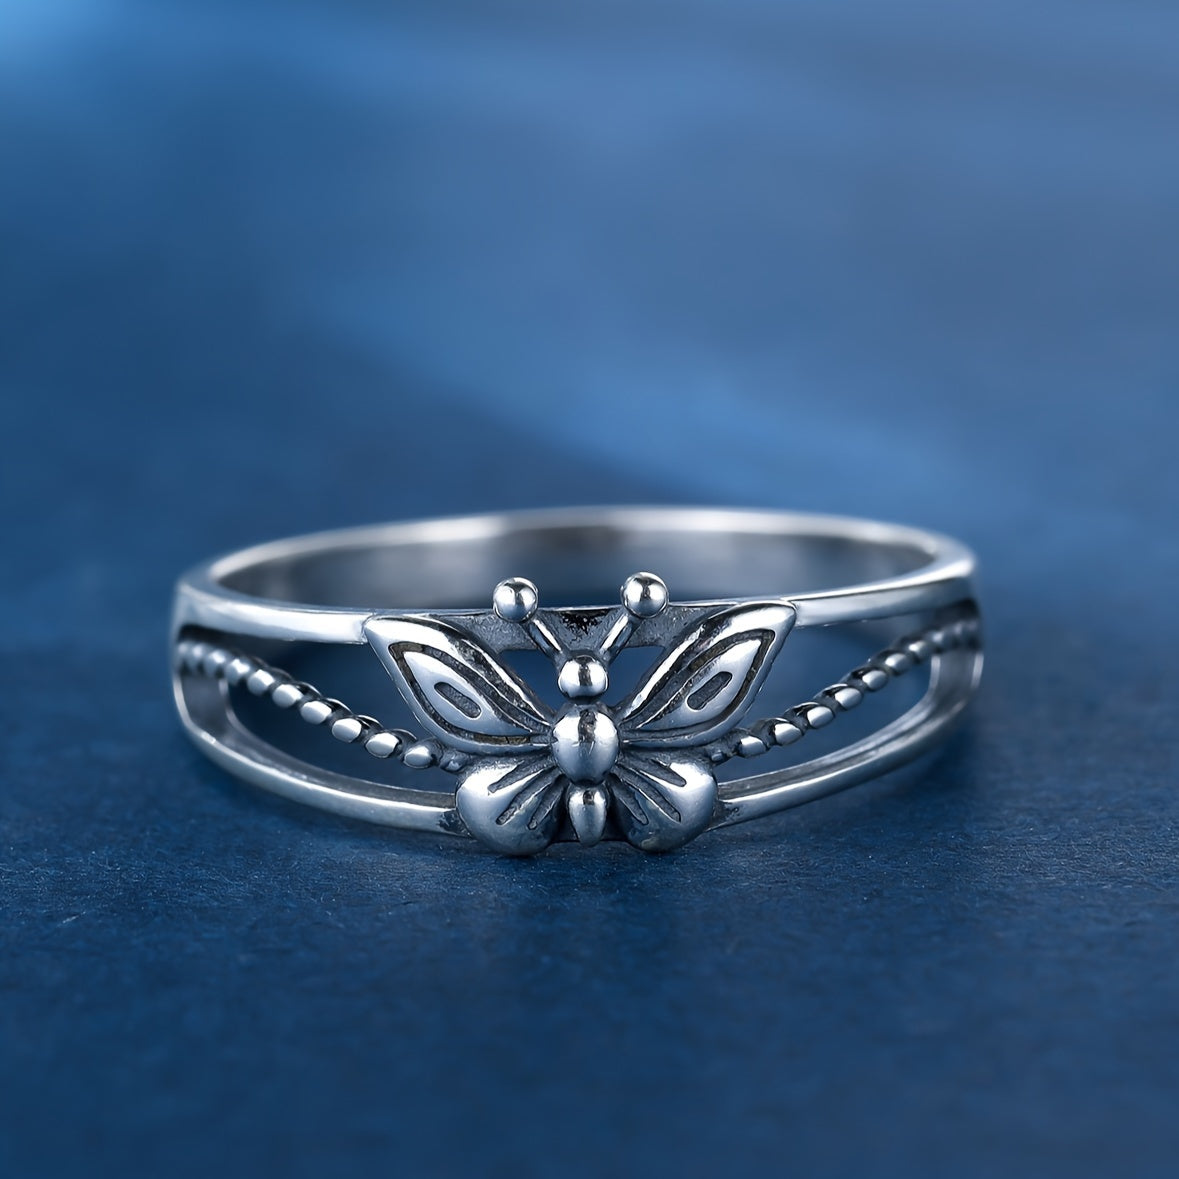 925 Sterling Silver Retro Butterfly Ring - High Quality Party Accessory Gift